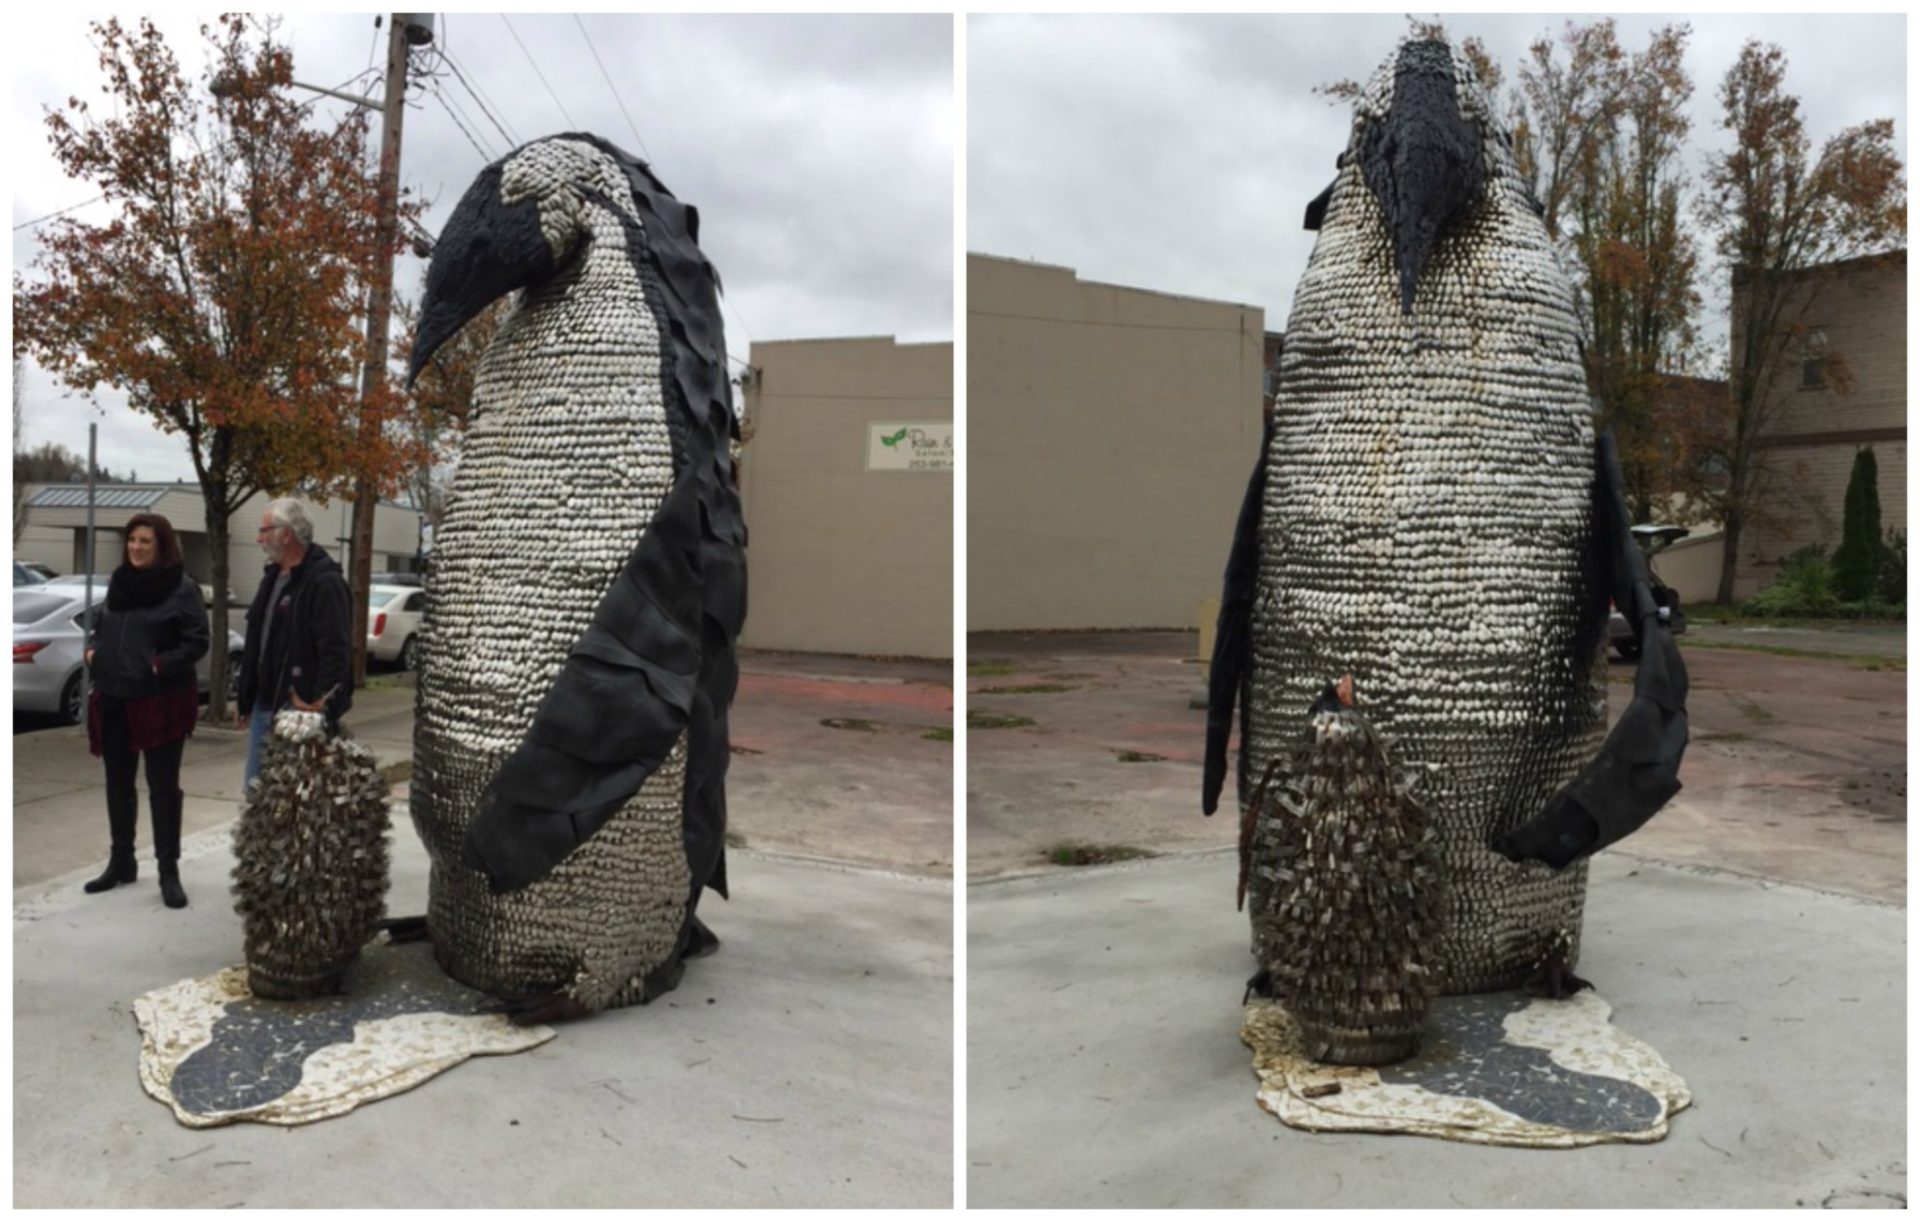 Kent Art: Father and Son Penguin are the latest addition to downtown Kent's eclectic mix of public art.